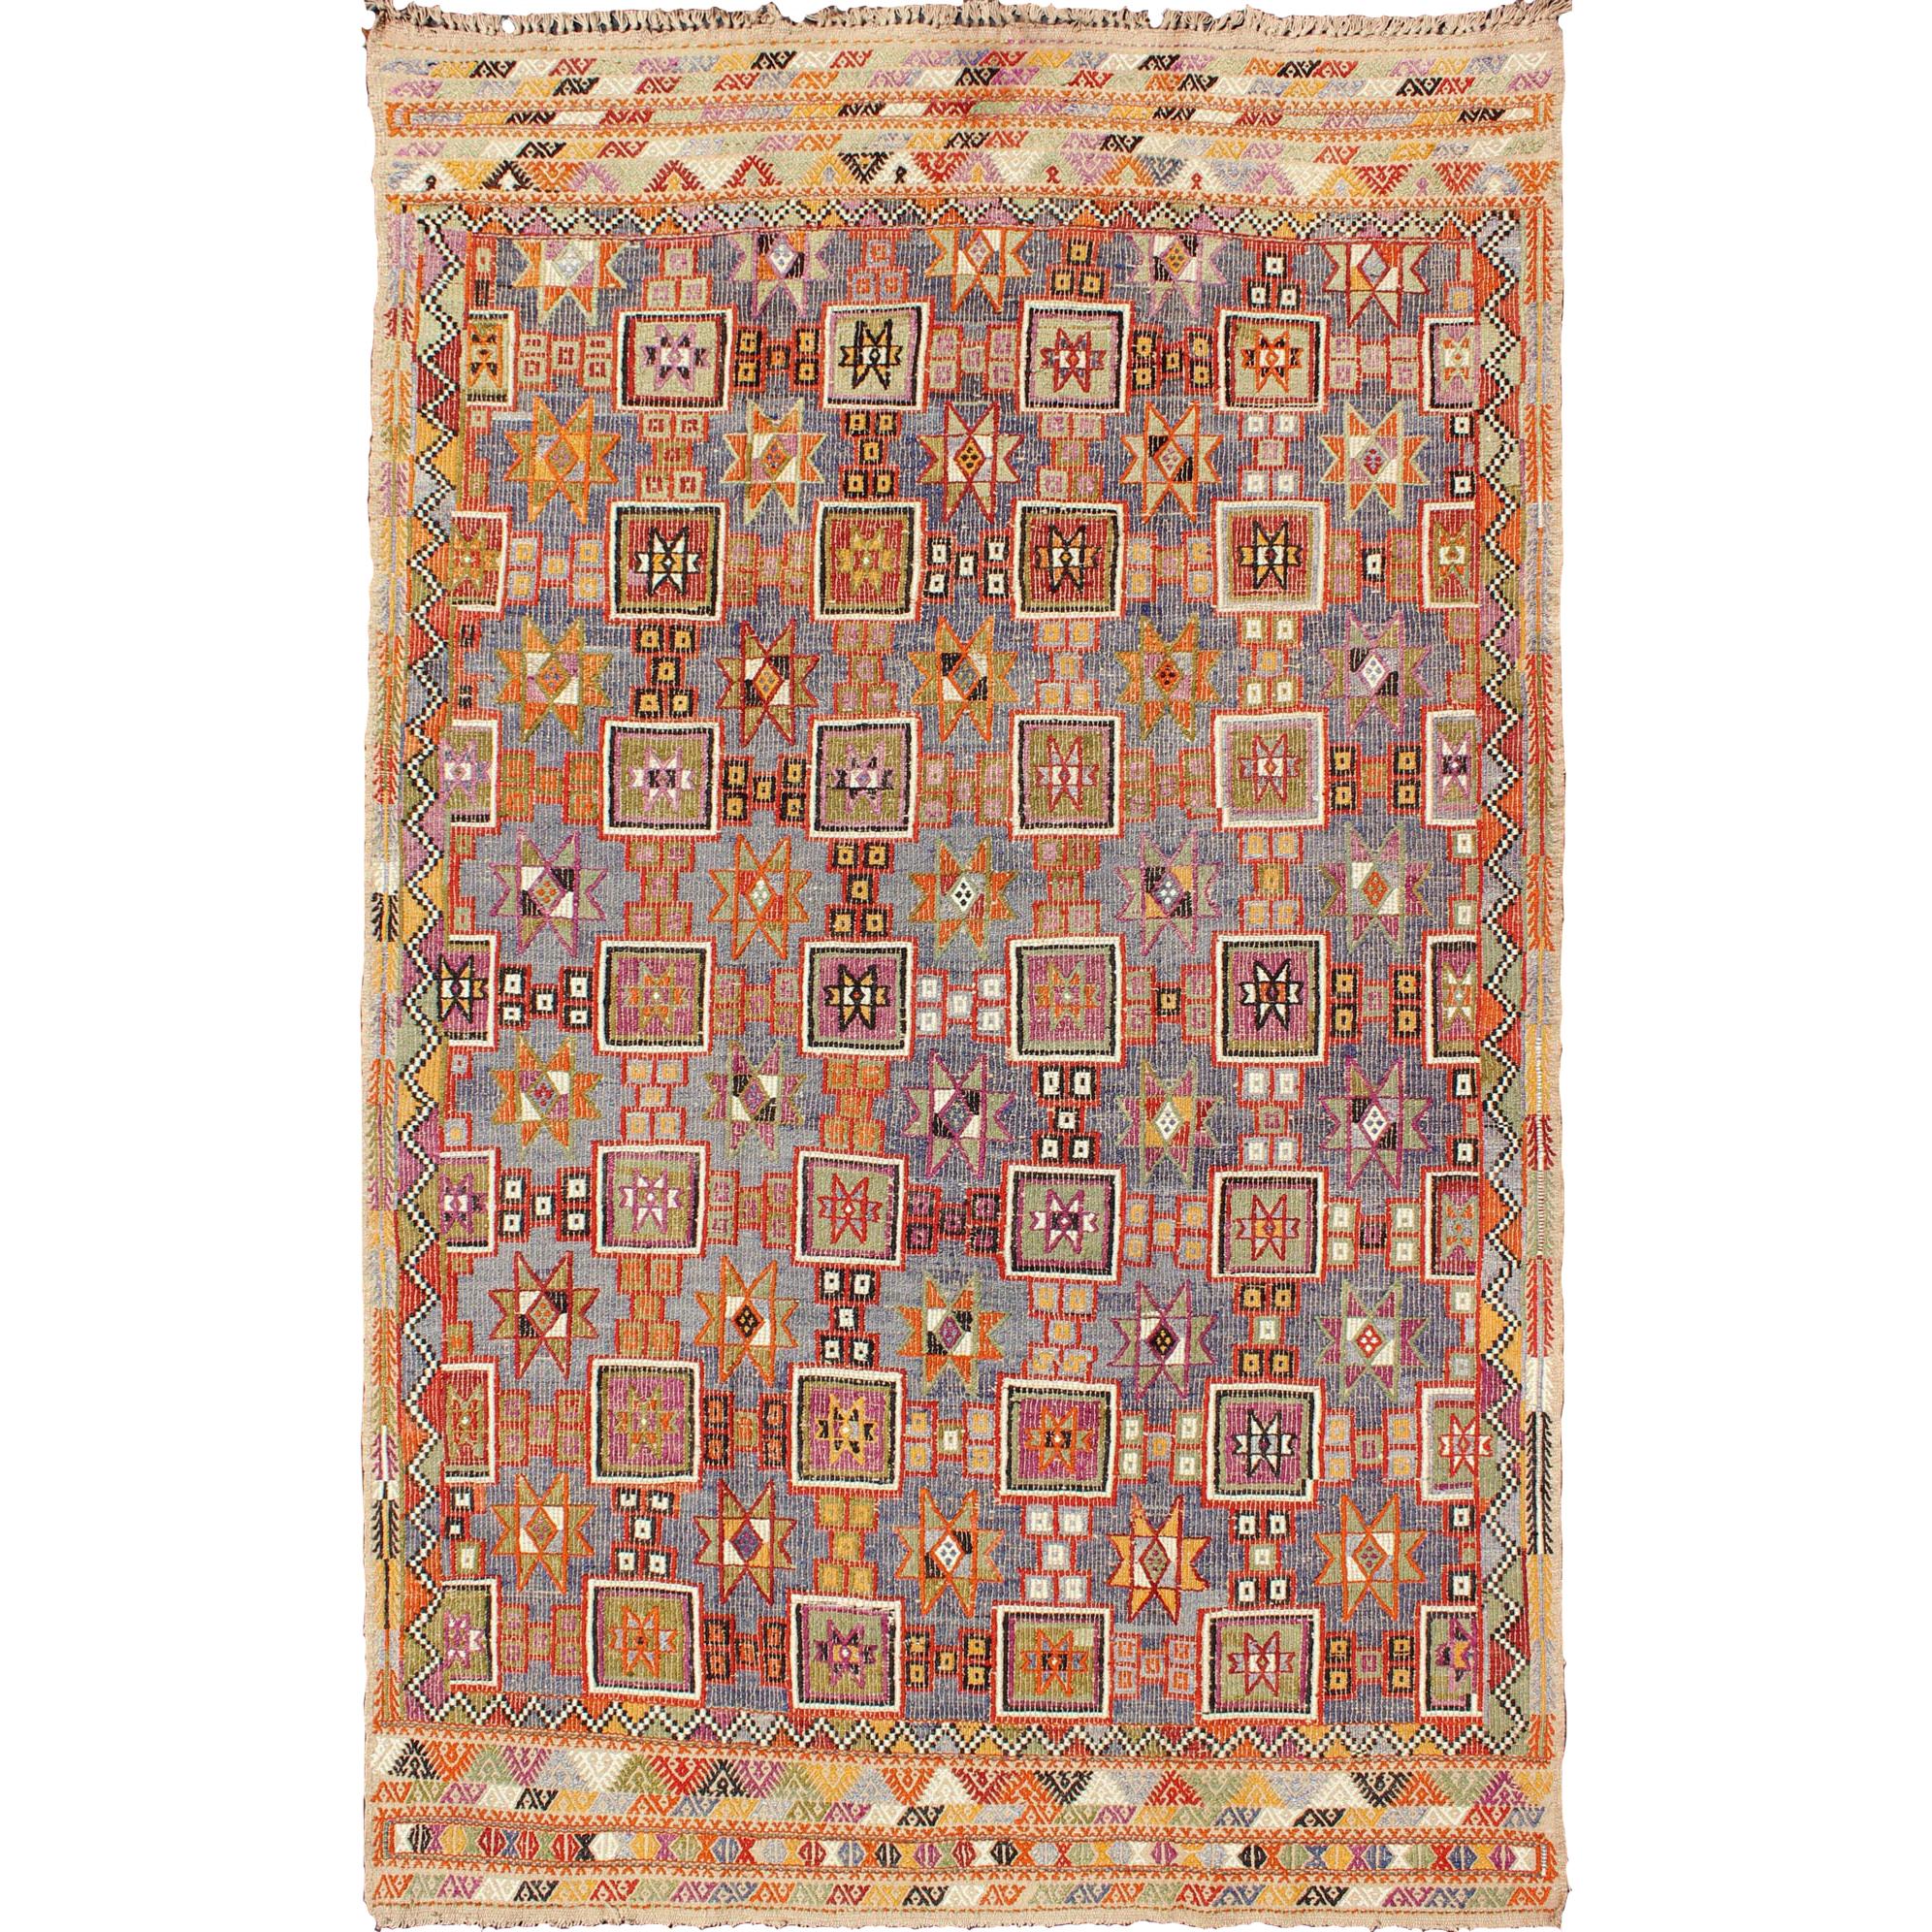 Vintage Embroidered Flat Weave Kilim Rug with Geometrics and Squared Design